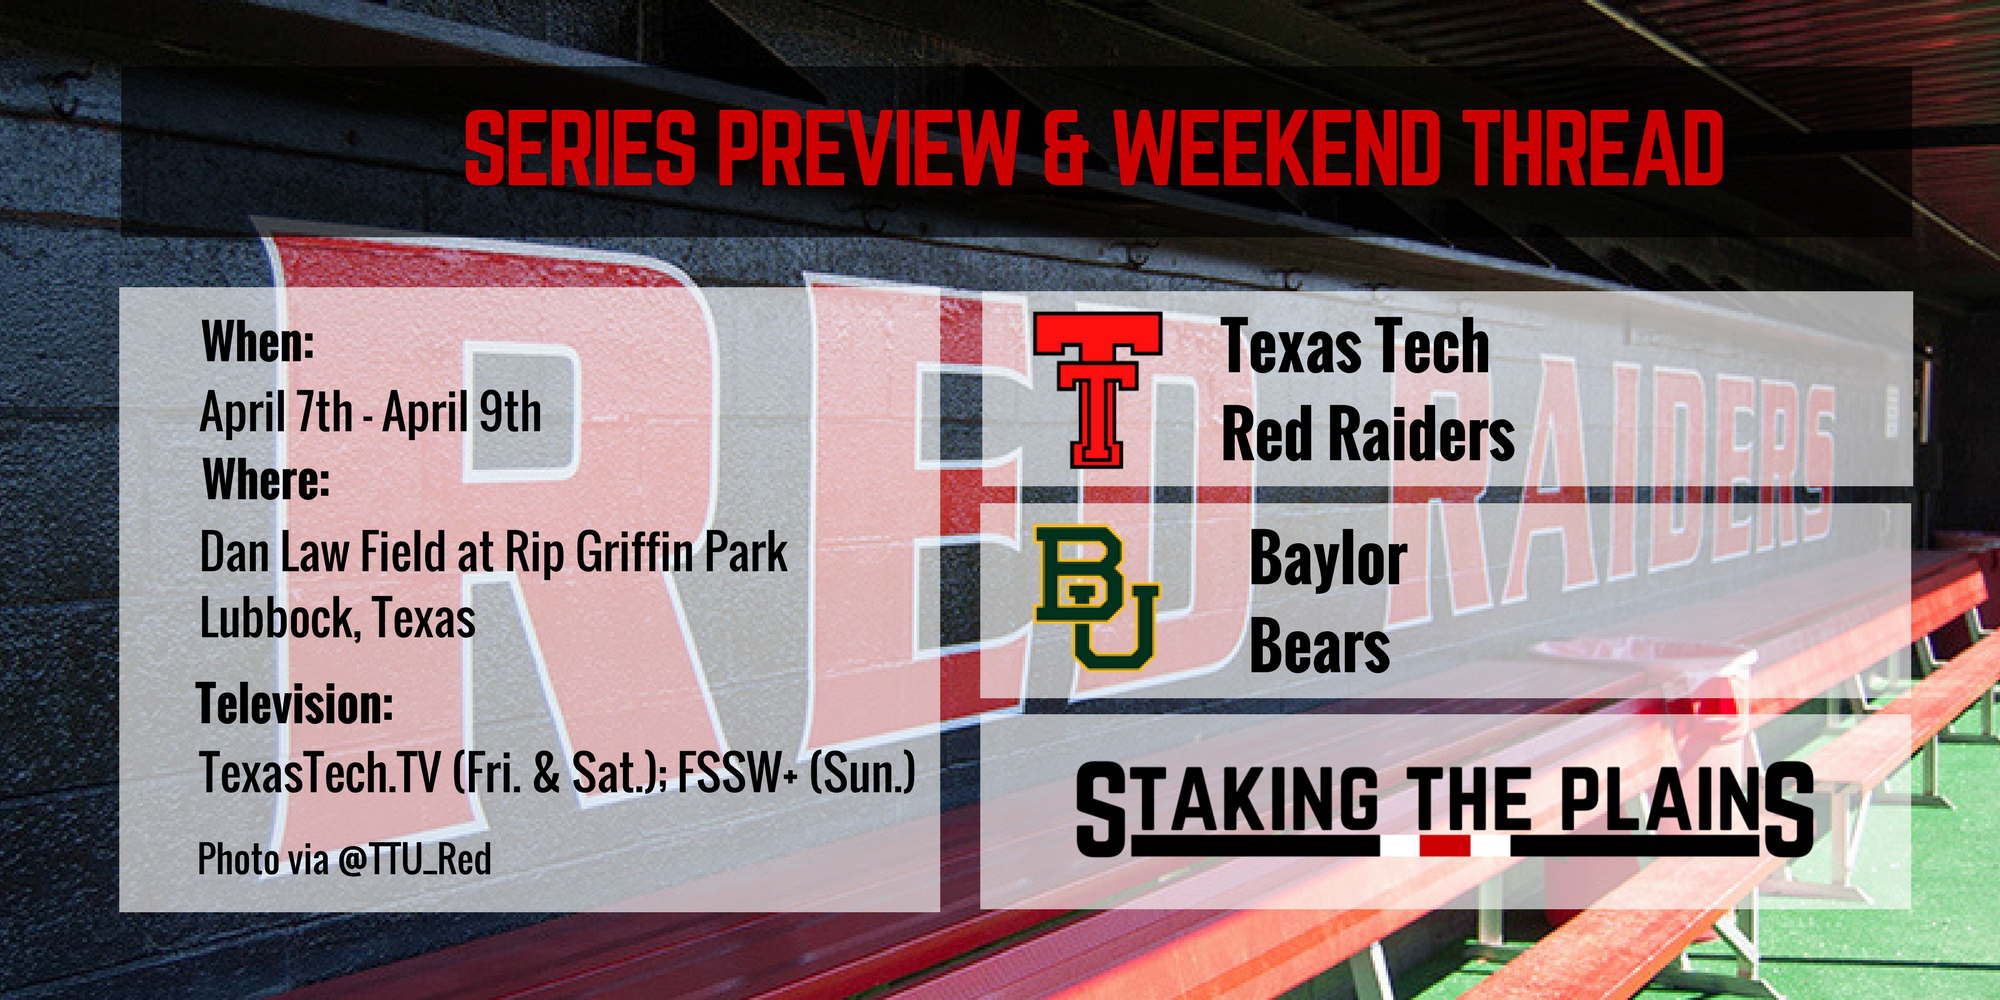 Series Preview and Weekend Thread: Baylor vs. Texas Tech